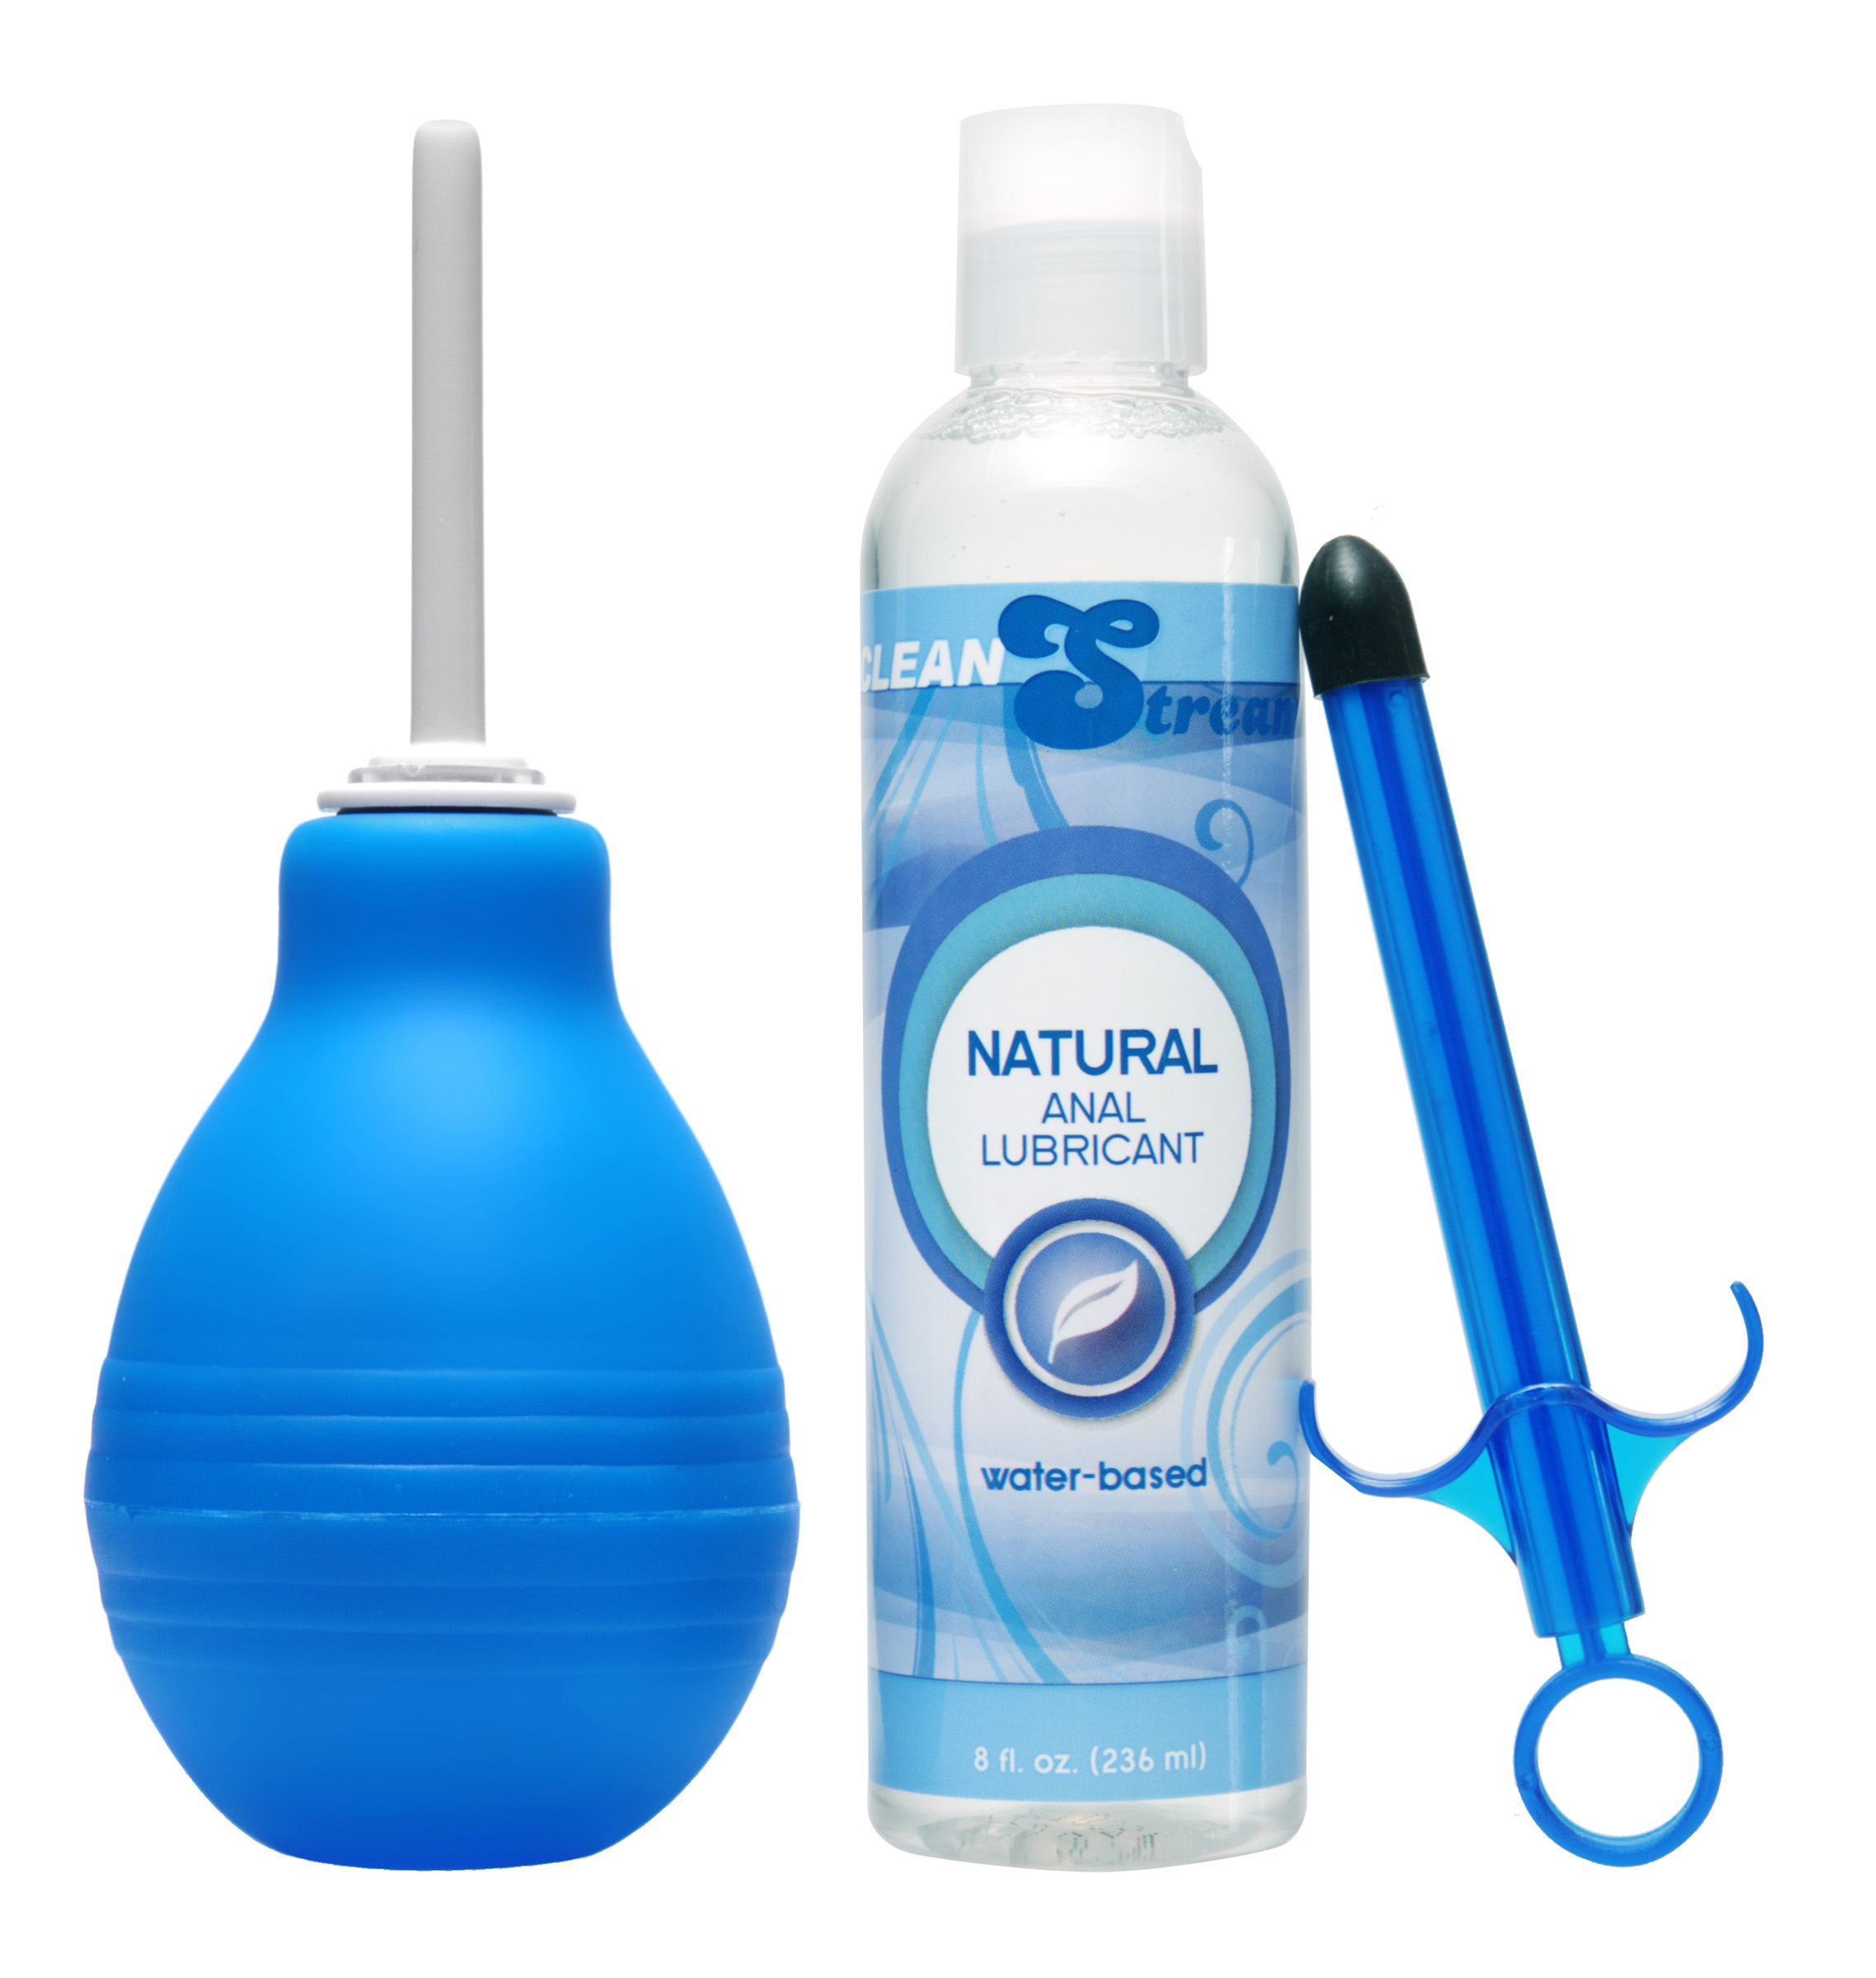 Easy+Clean+Enema+Bulb+and+Lube+Launcher+Kit